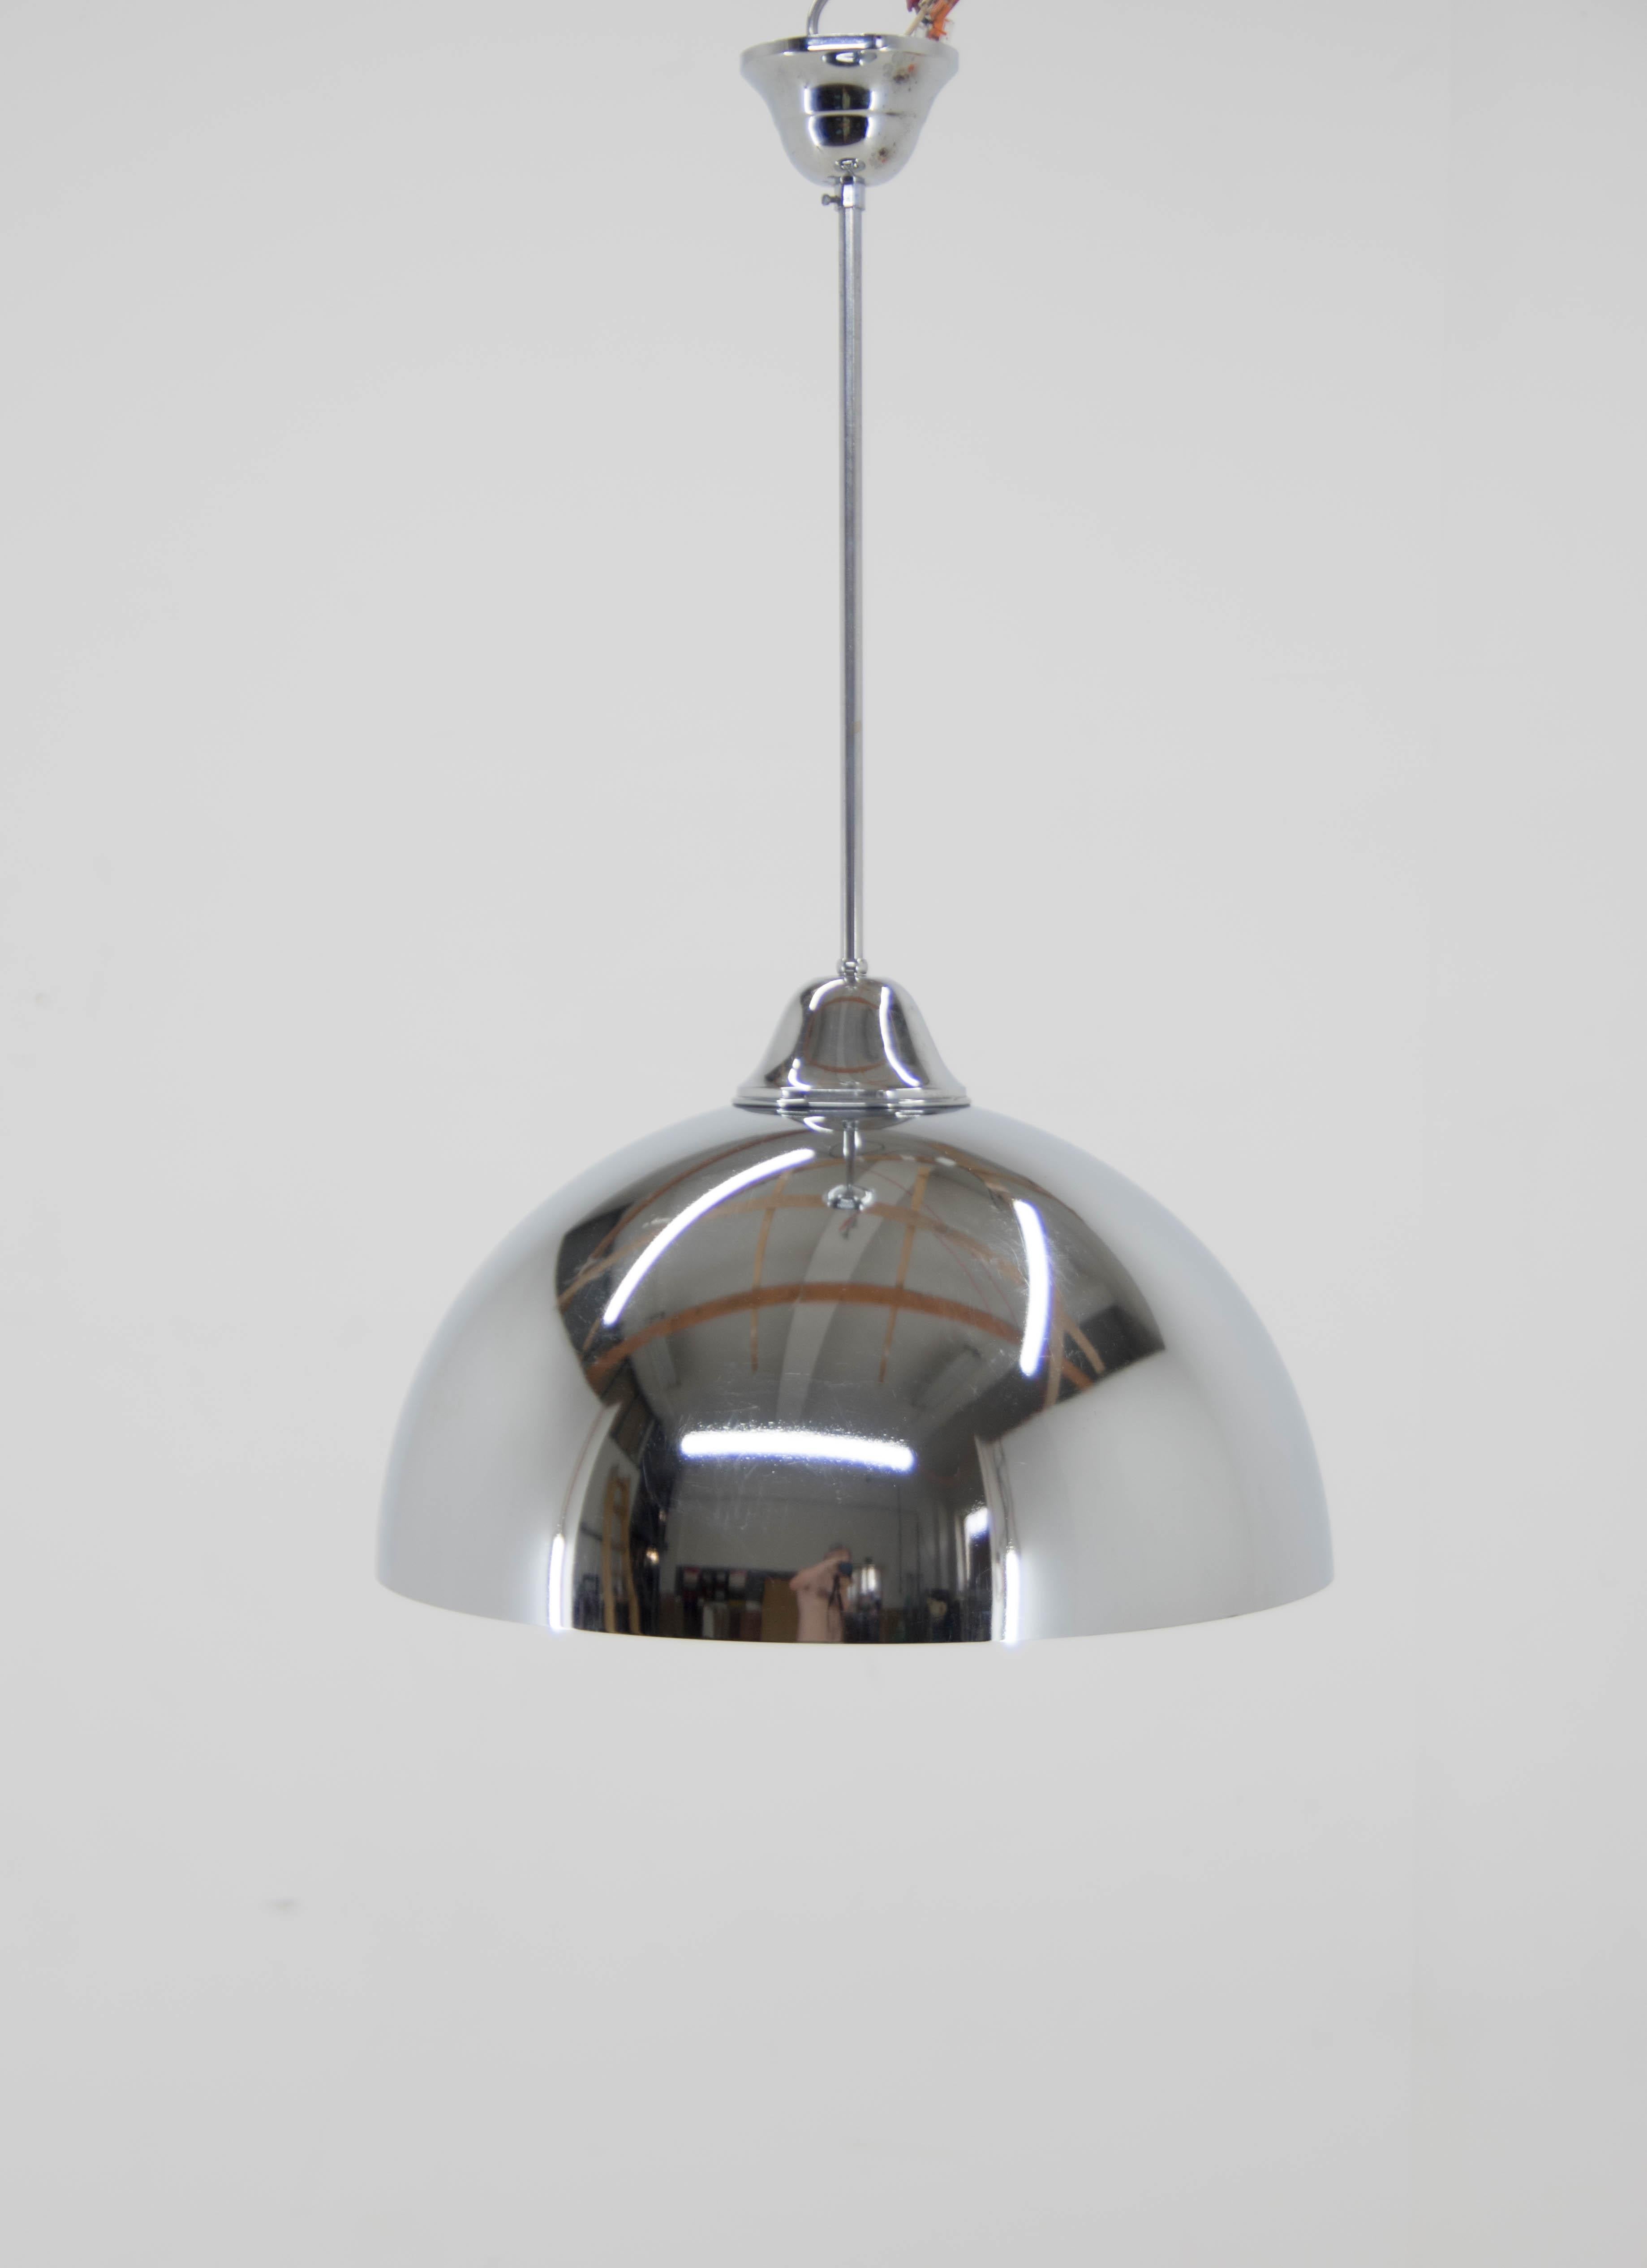 Rare Bauhaus pendant made in Czechoslovakia in 1930s.
Minimalistic beautiful design.
Restored: chrome polished, new white paint, rewired:
1x100W, E25-E27 bulb
US wiring compatible